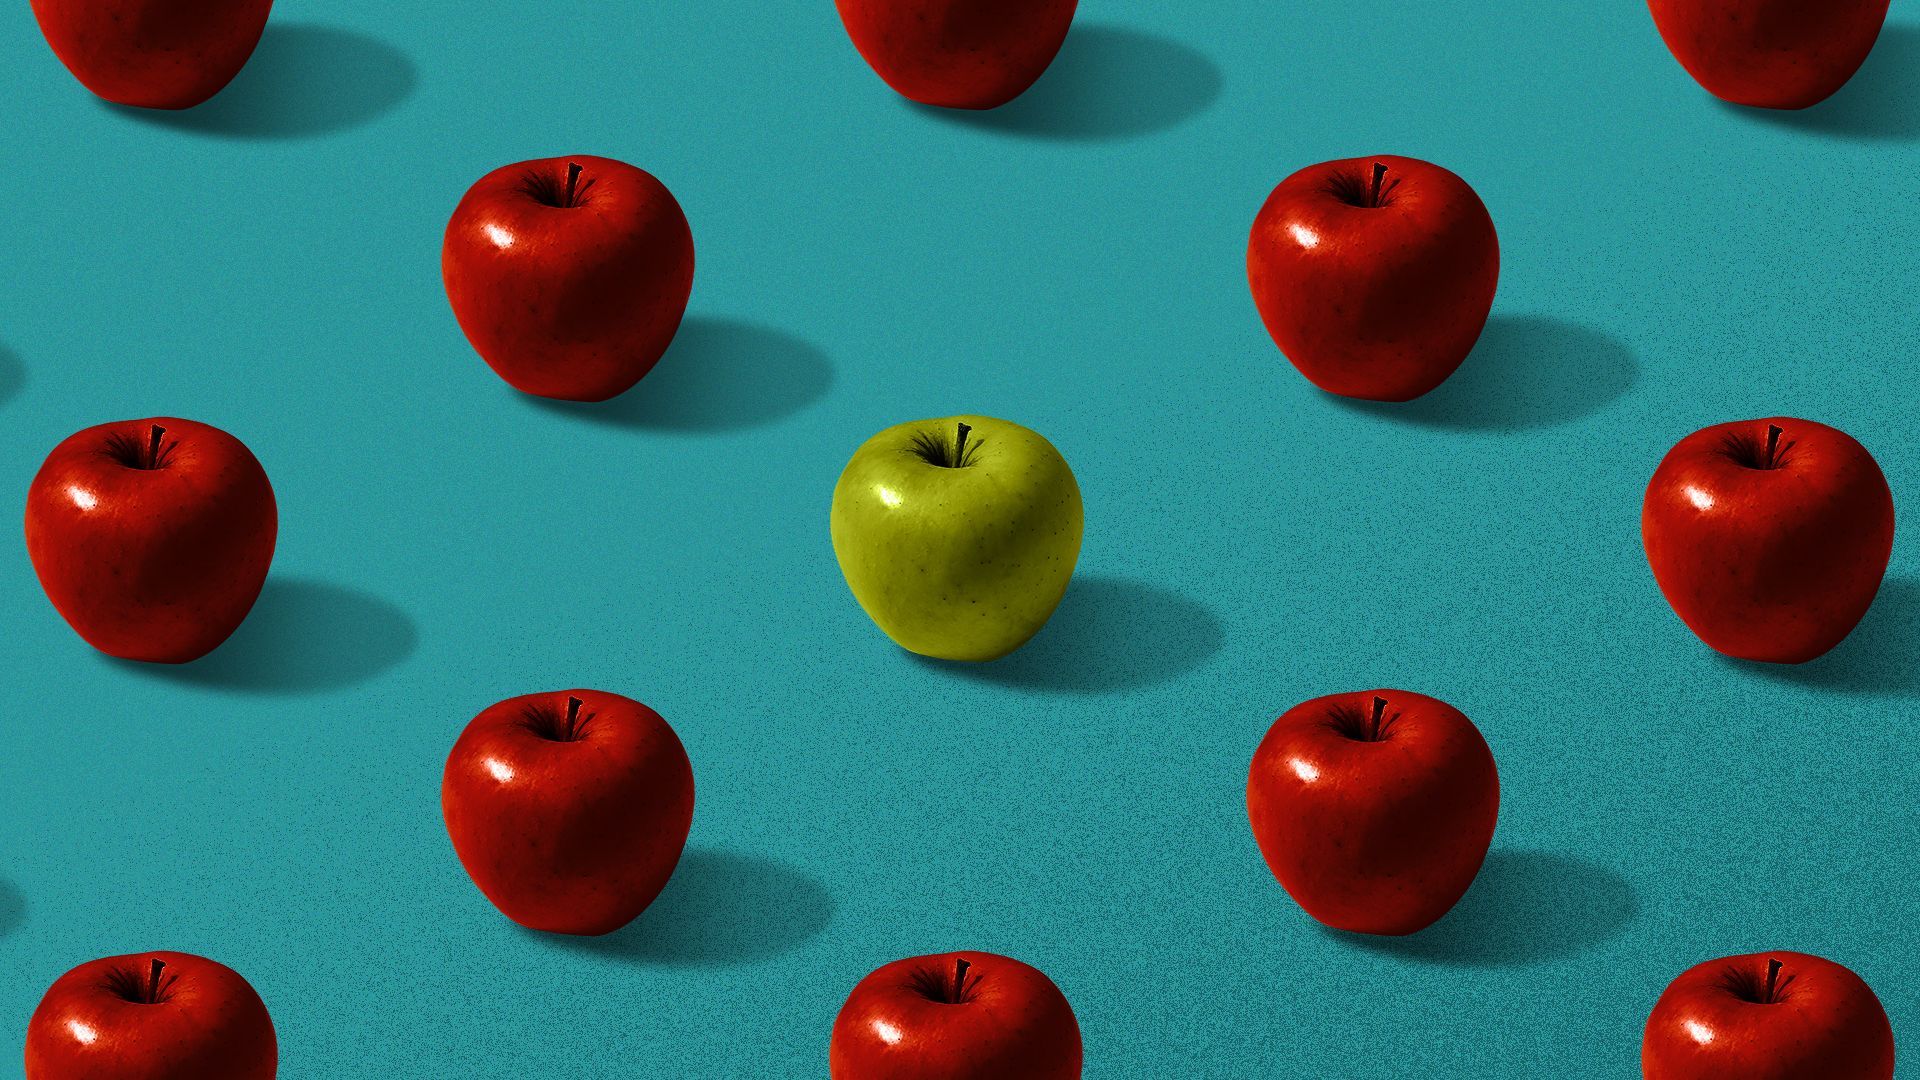 Illustration of a green apple surrounded by red apples.